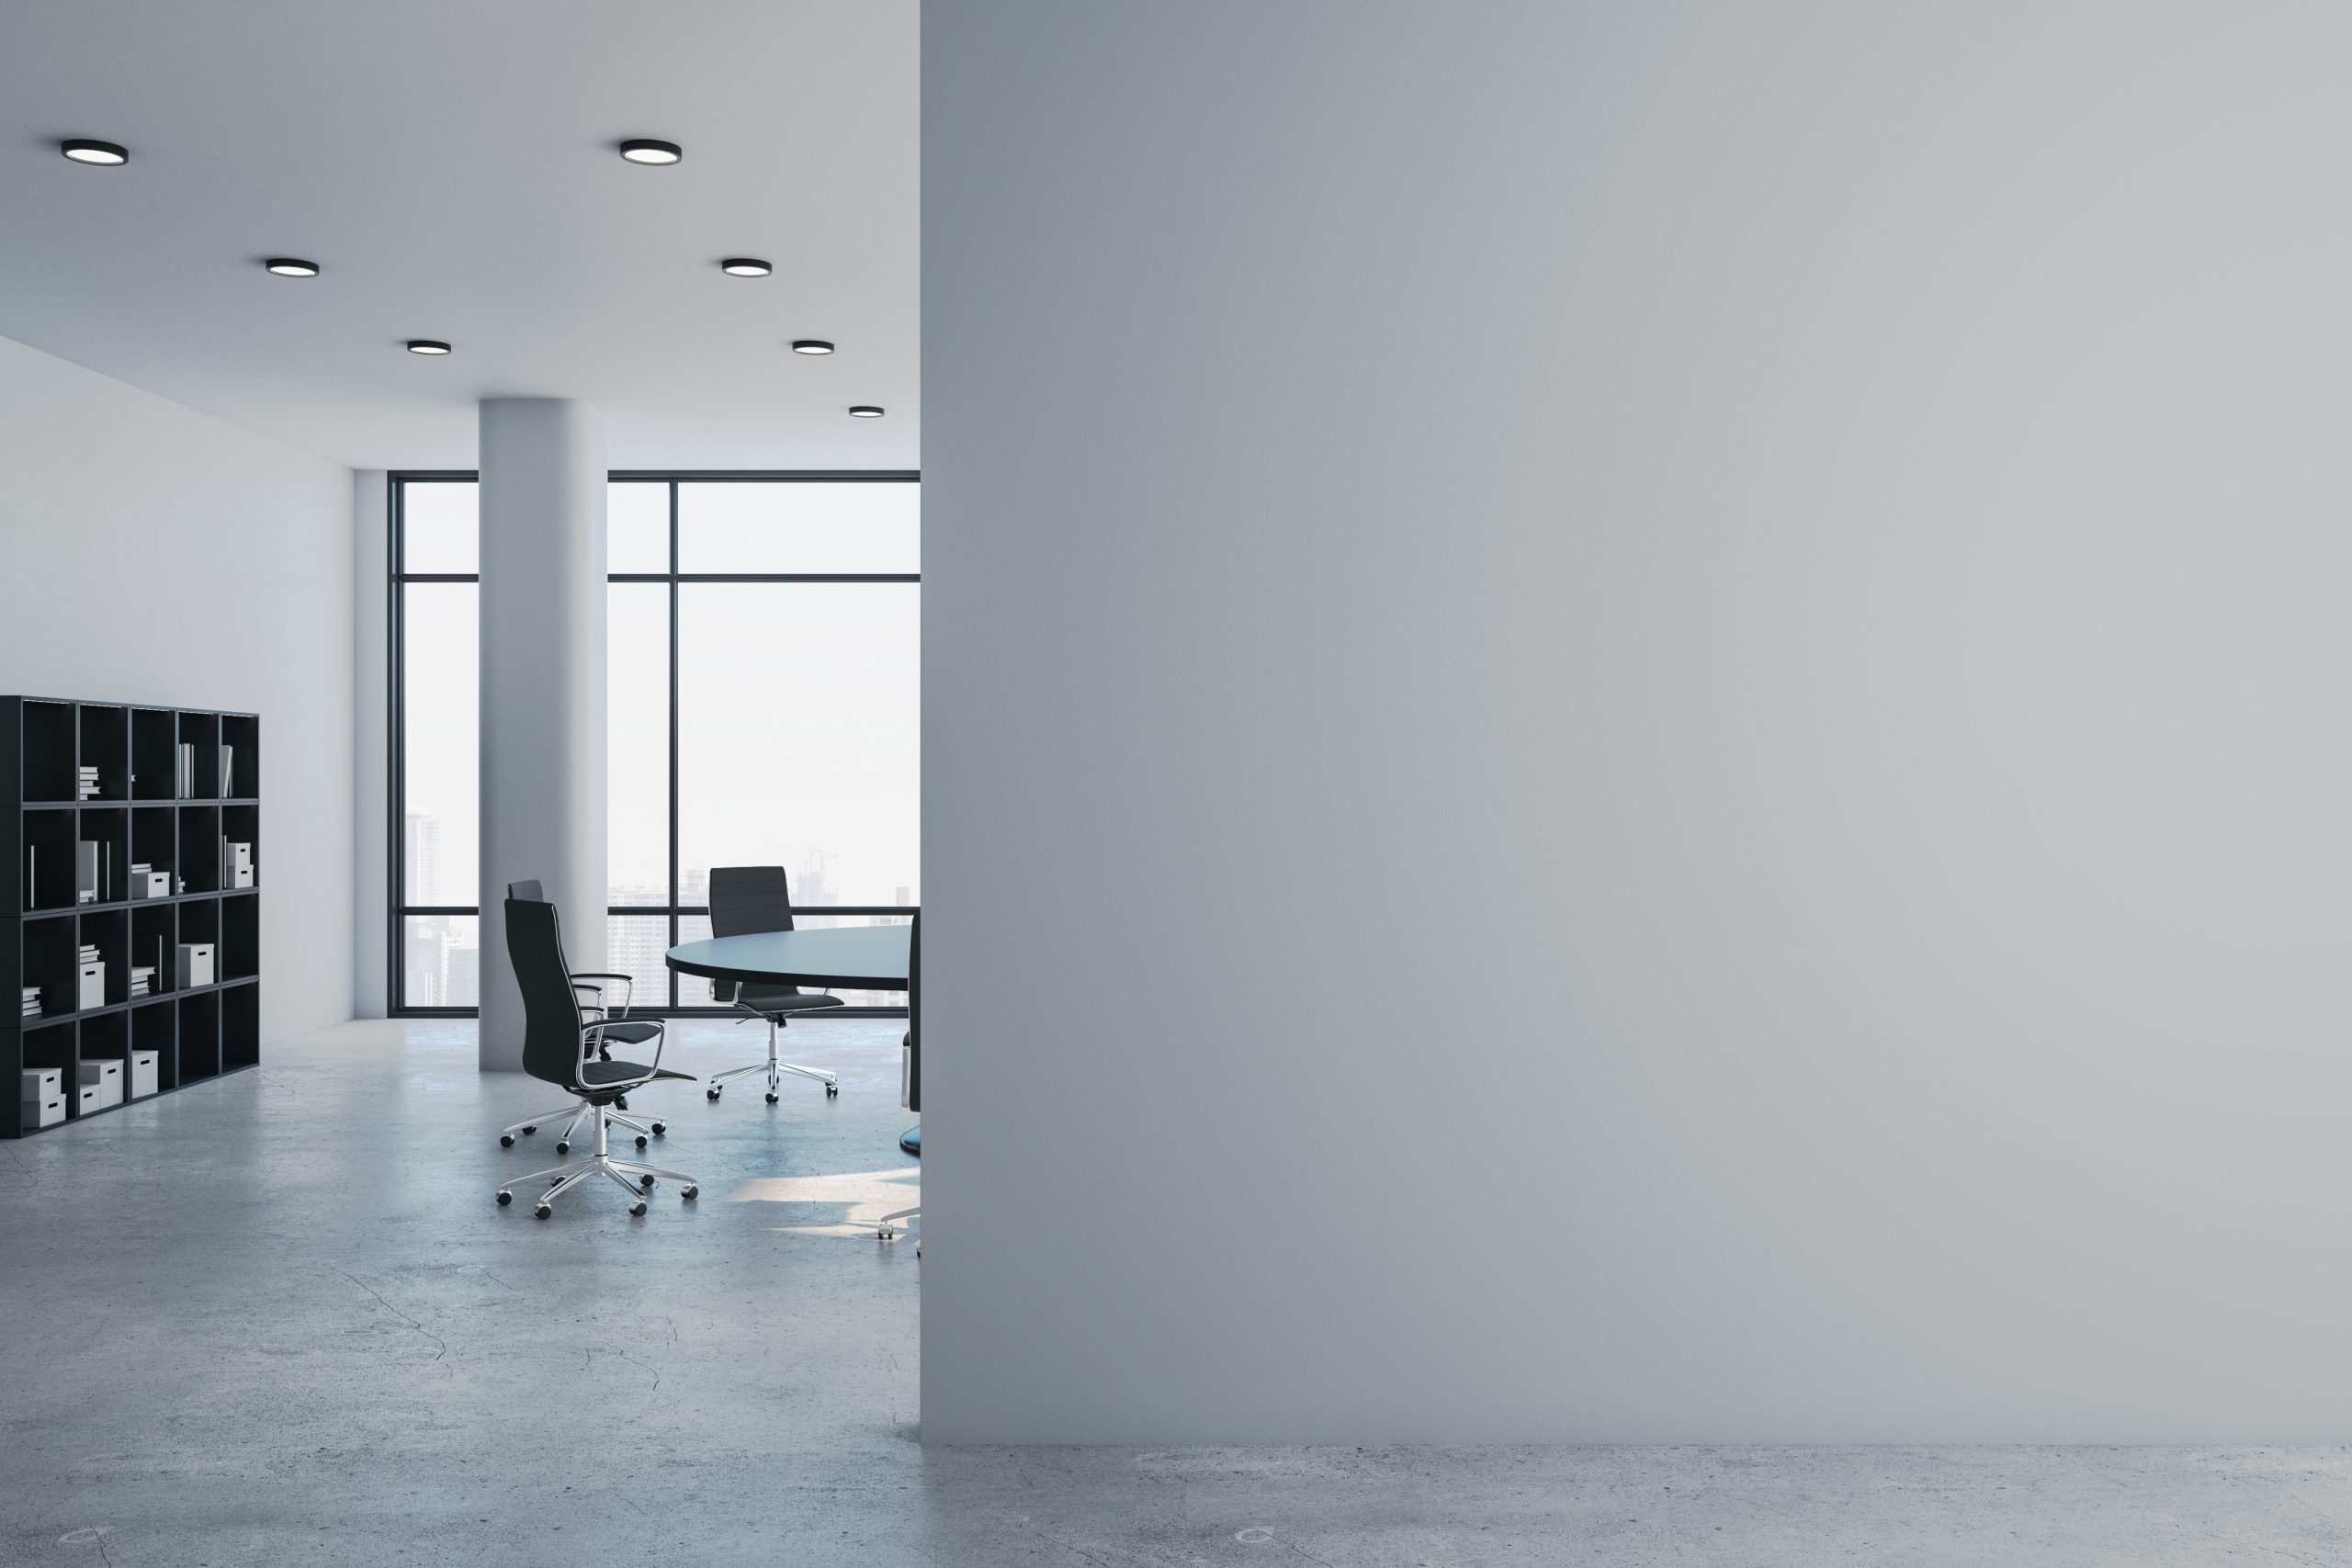 Luxury,Meeting,Room,With,Panoramic,City,View,And,Blank,Gray